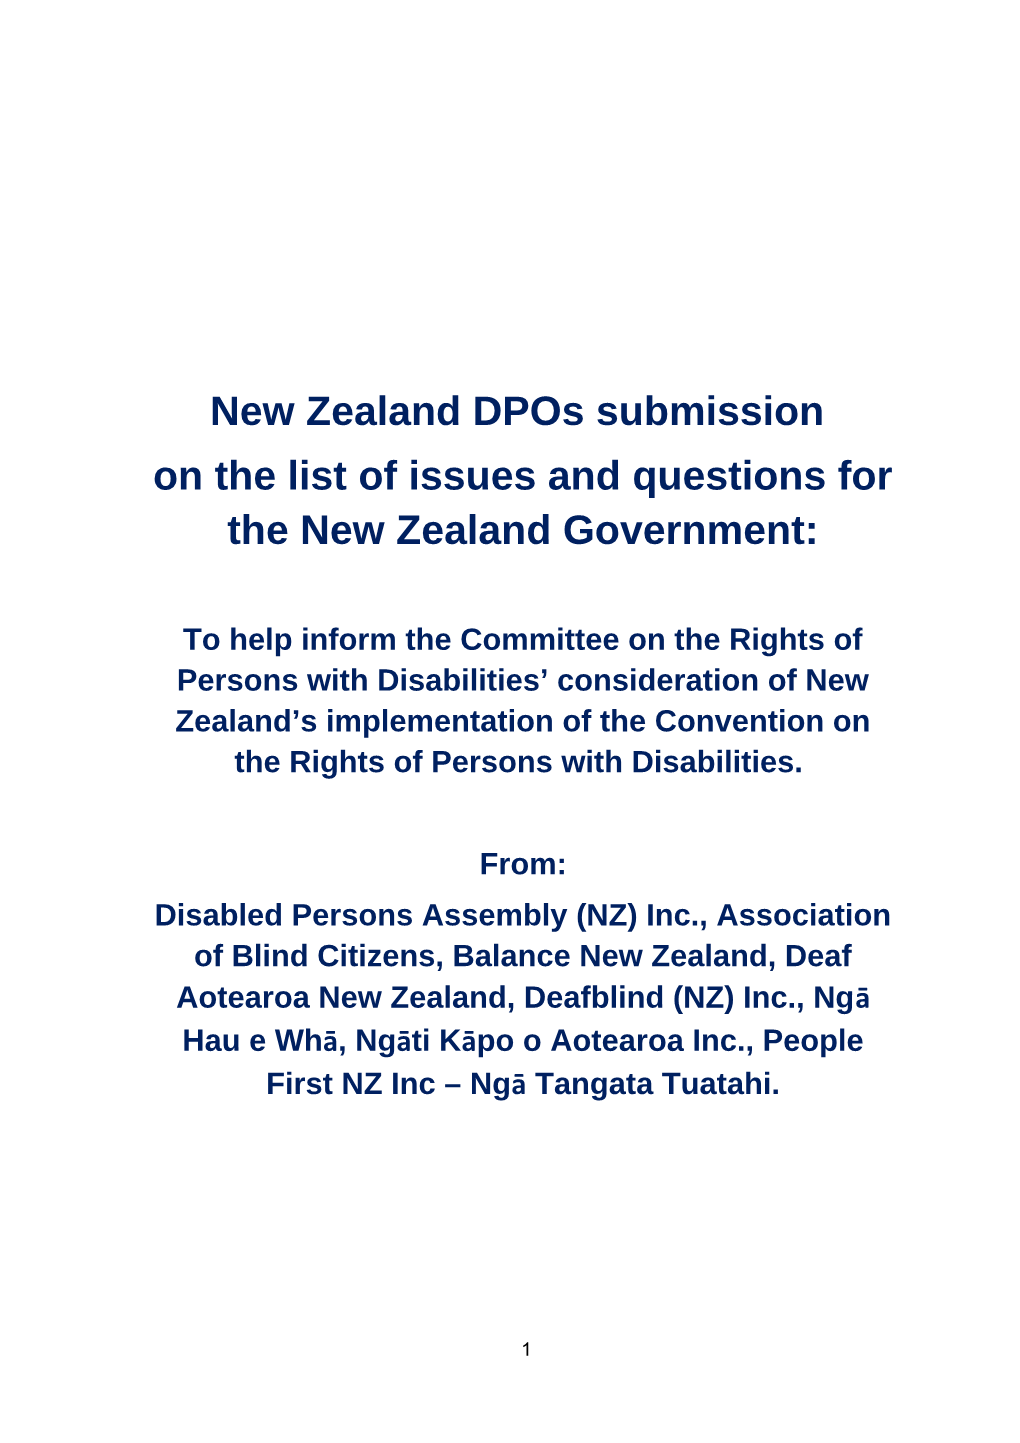 On the List of Issues and Questions for the New Zealand Government